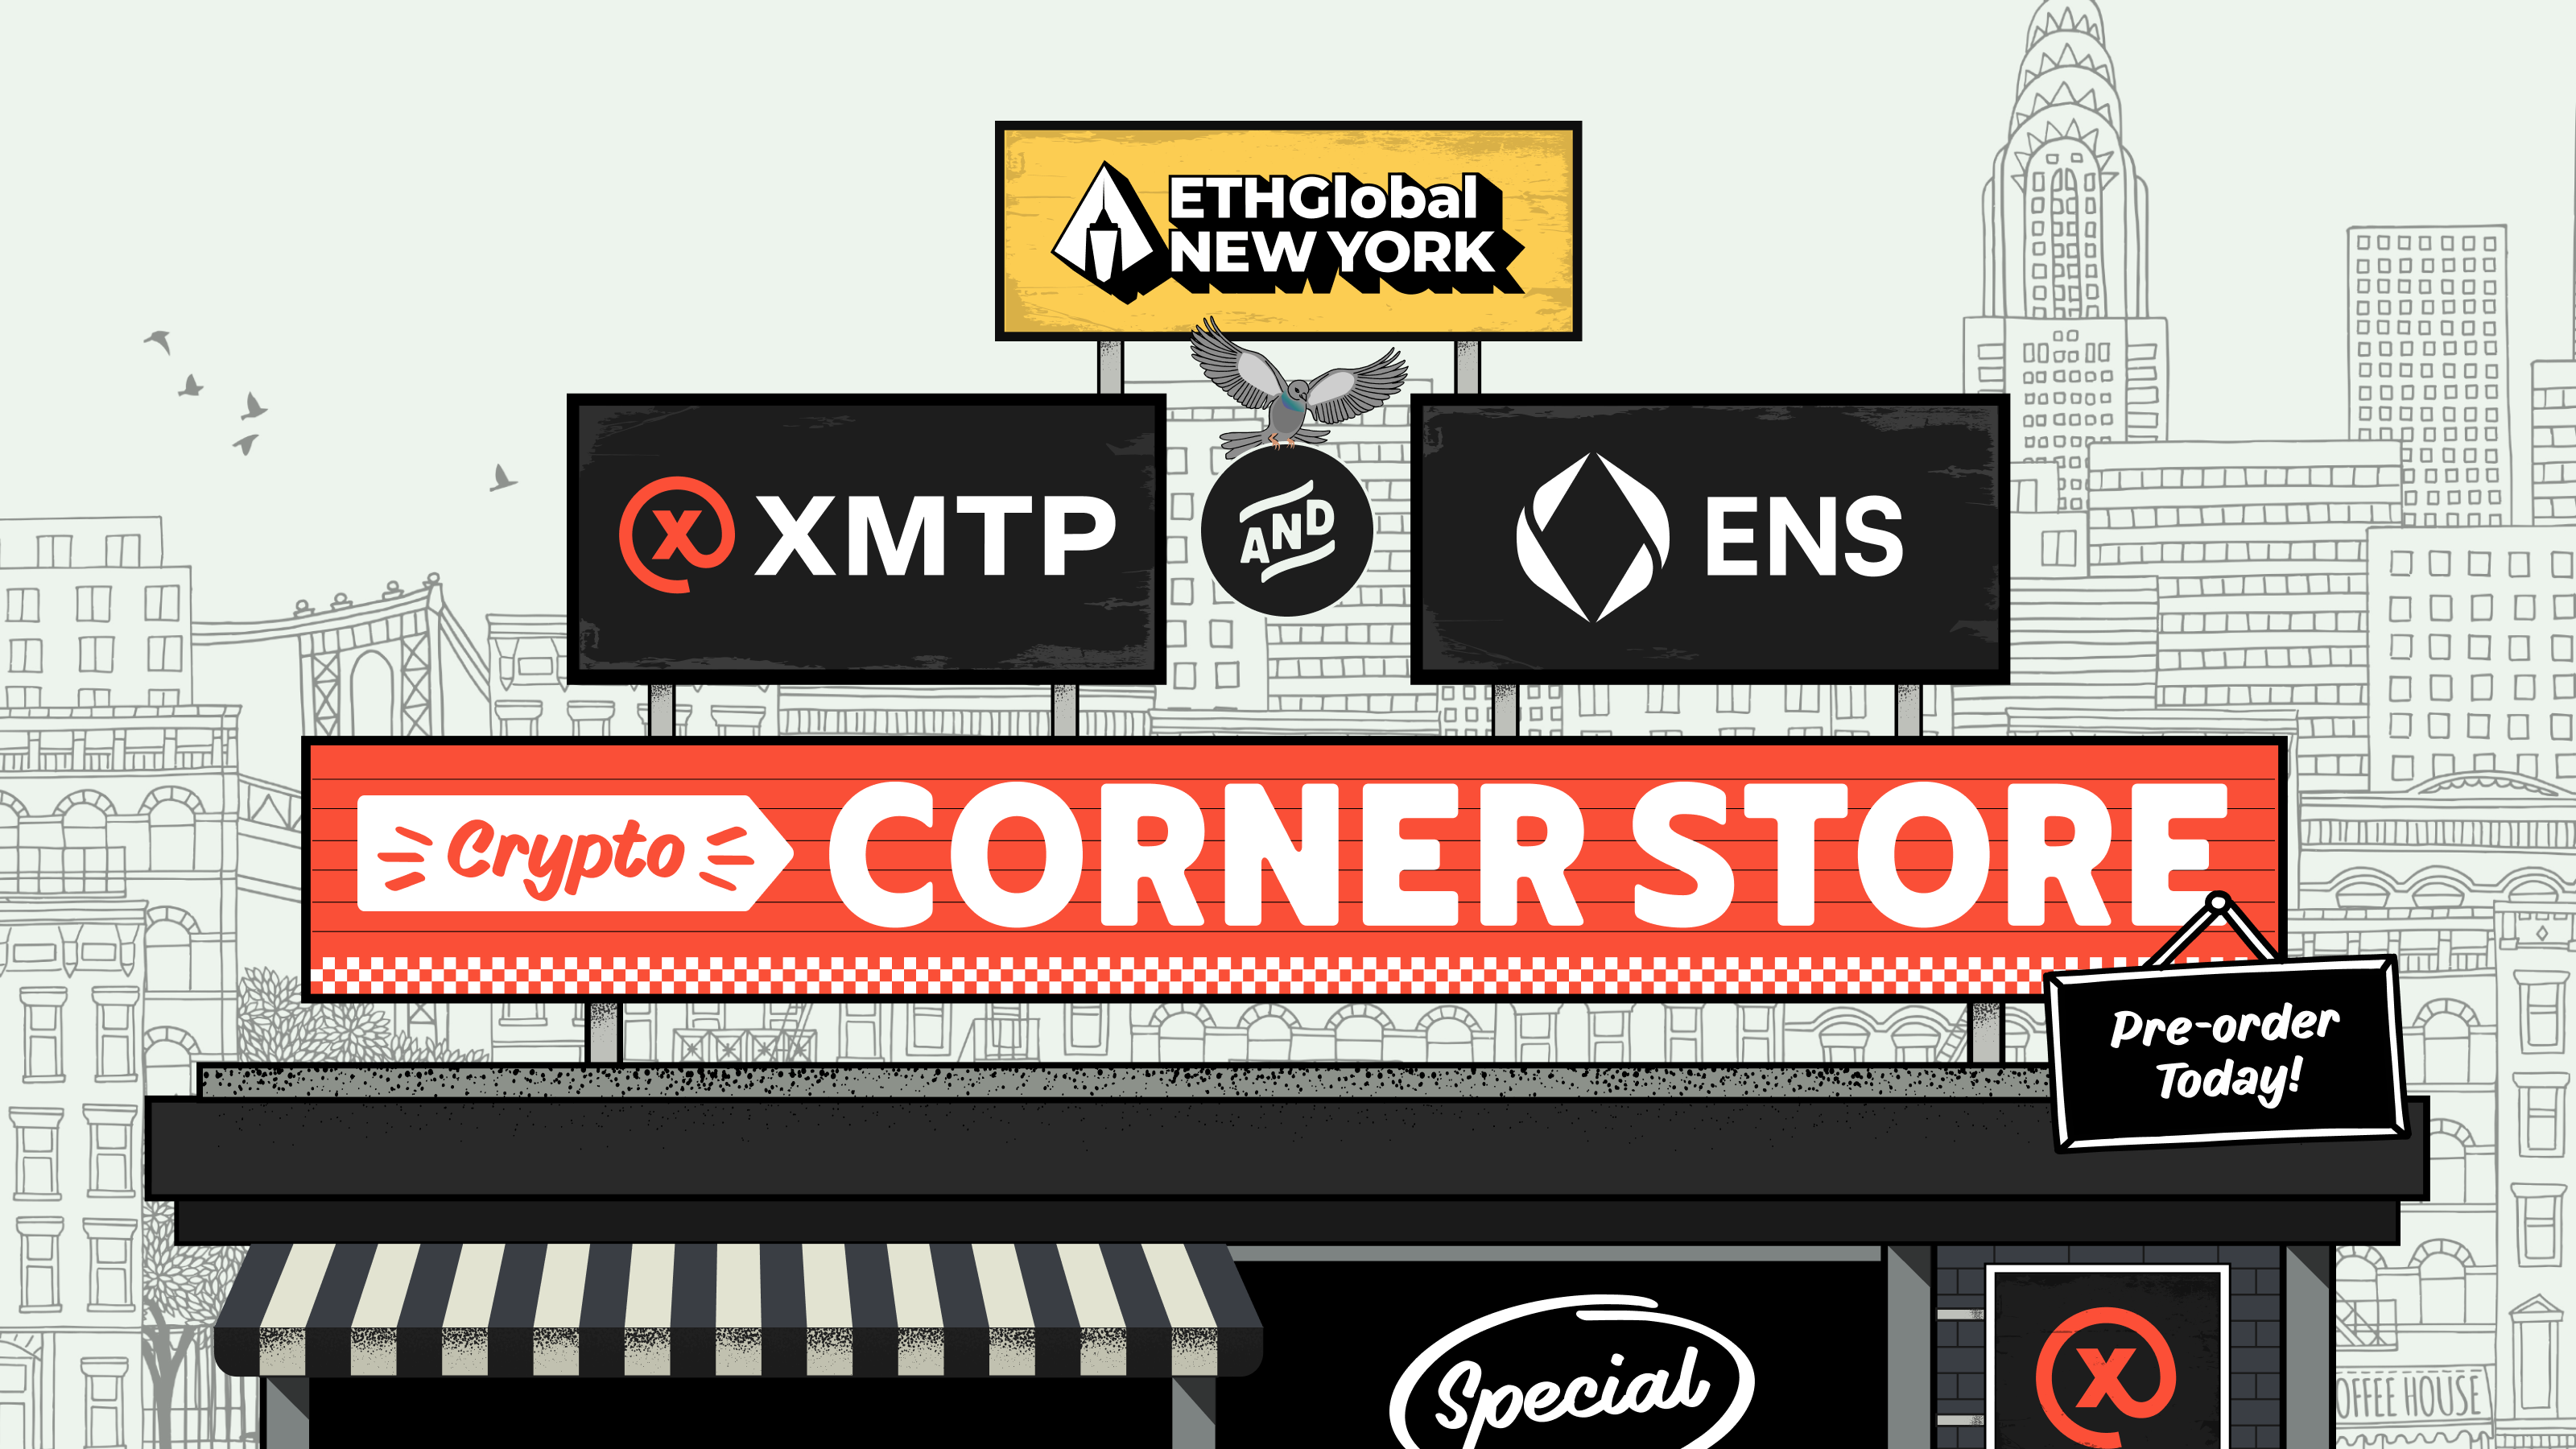 ETH Global New York XMTP x ENS Crypto Cornerstore post cover